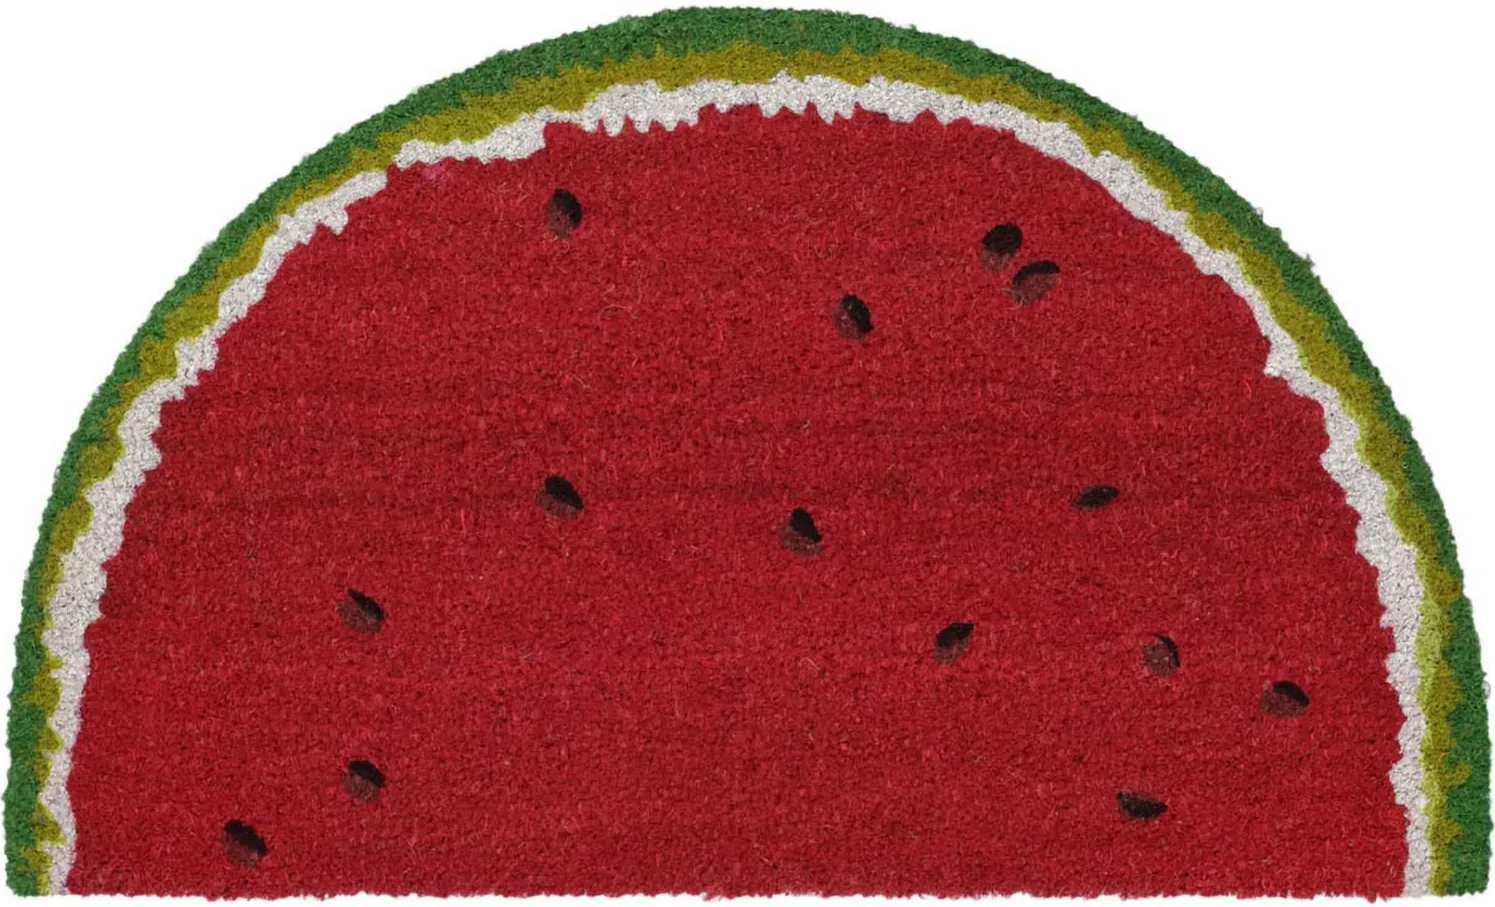 Liora Manne Natura Watermelon Outdoor Mat in Red by Trans-Ocean Import Co Inc